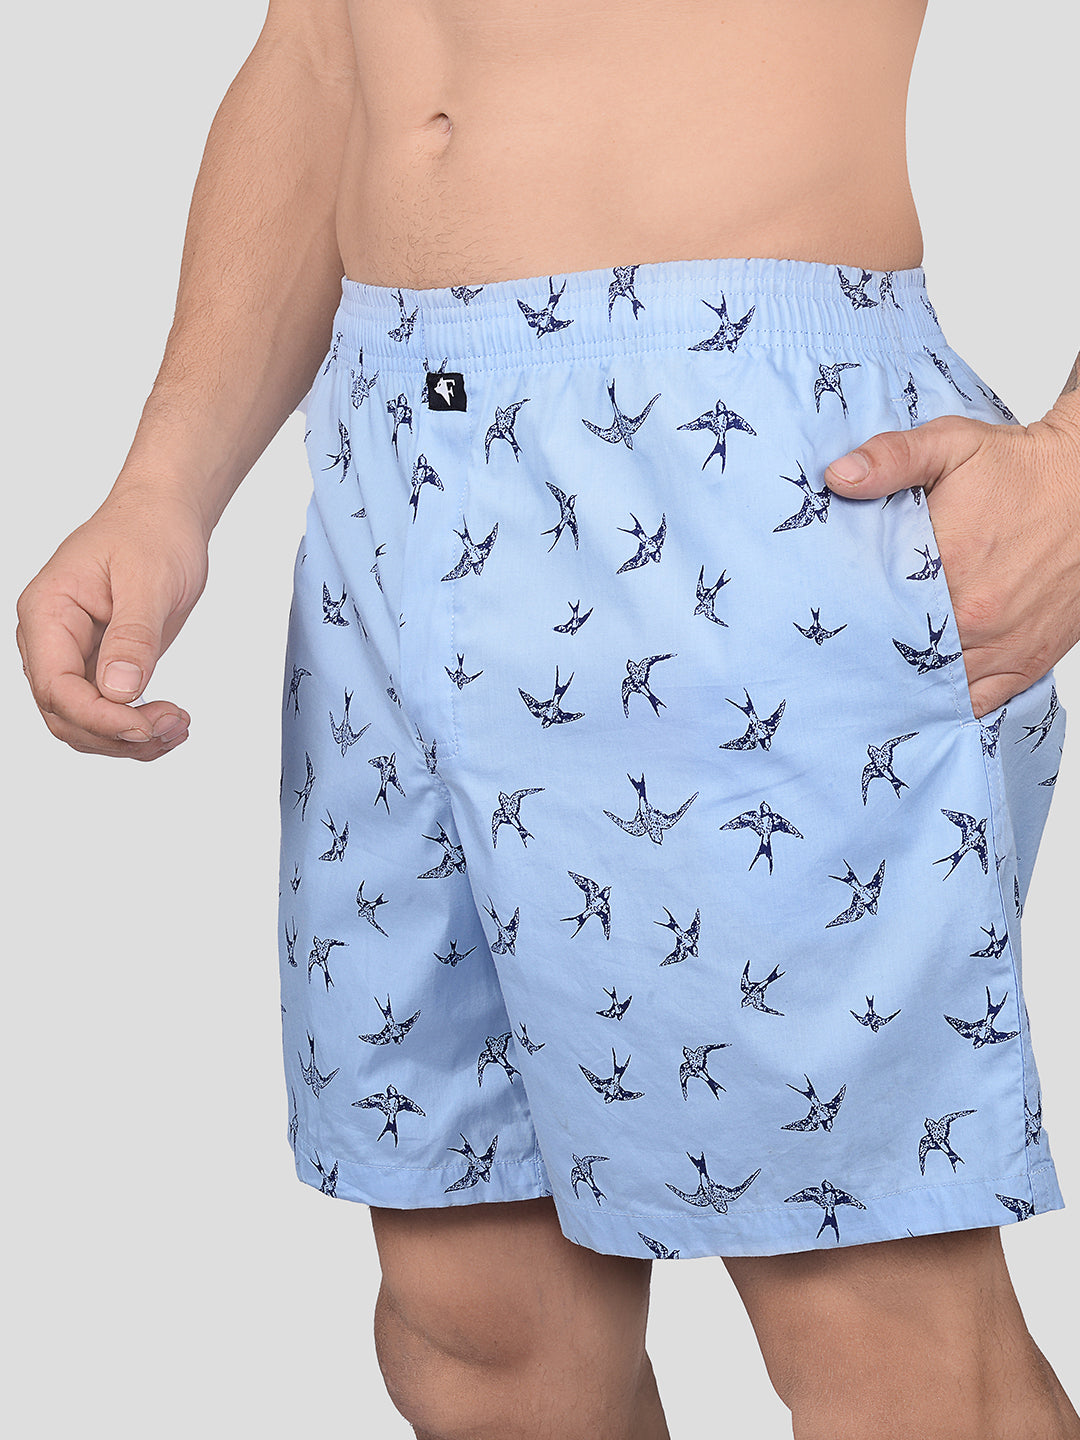 Frenchie Men's Boxer Printed Shorts LB (Assorted) – VIP Inners